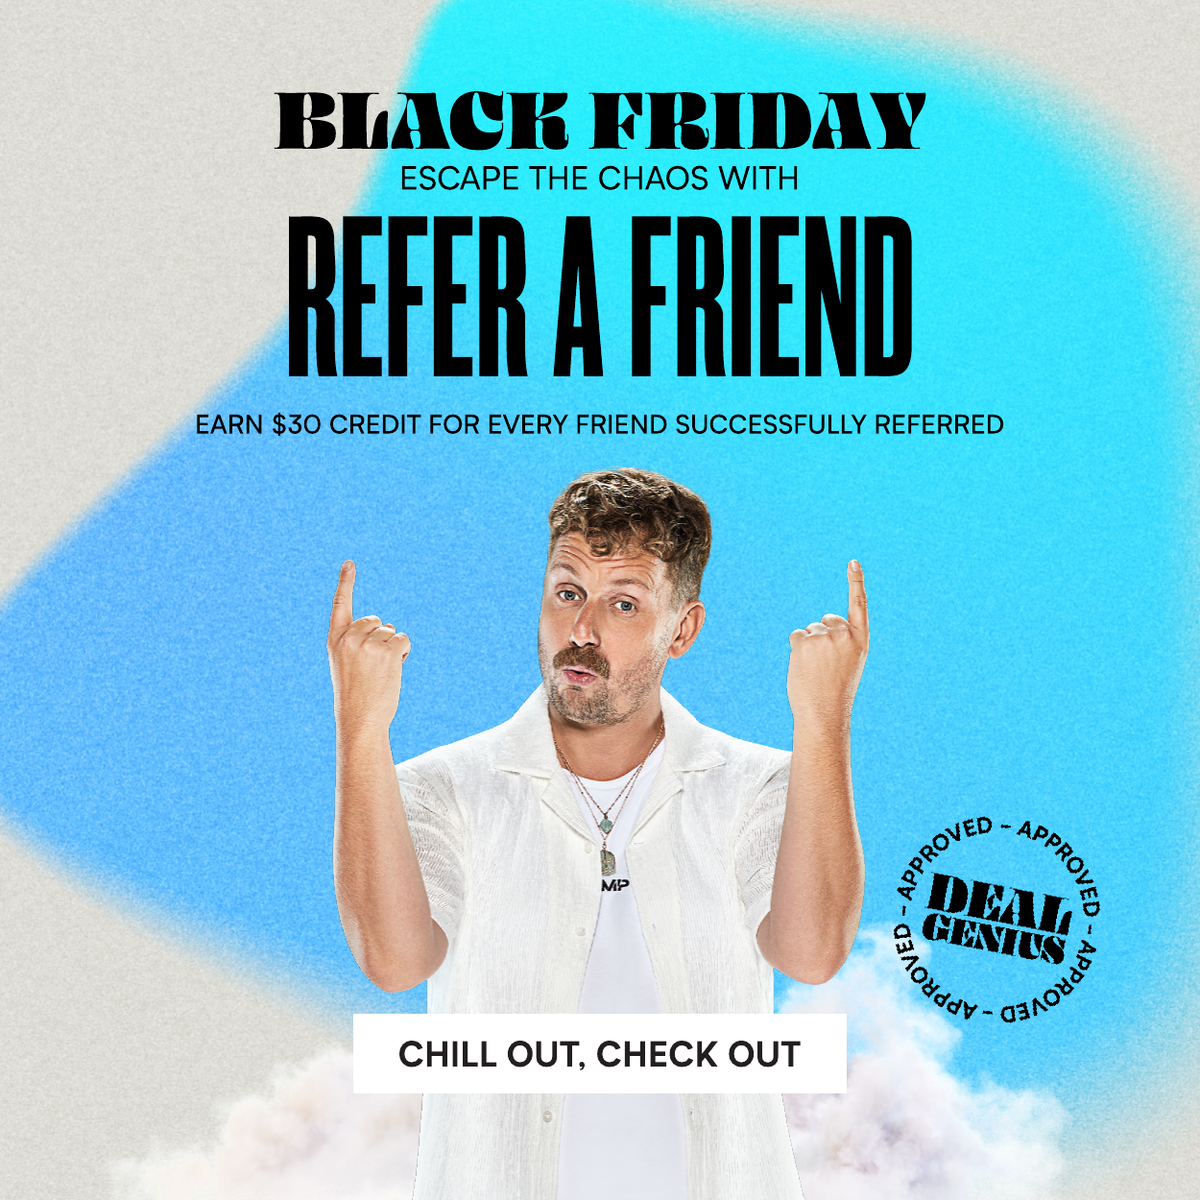 Refer a friend and earn $30